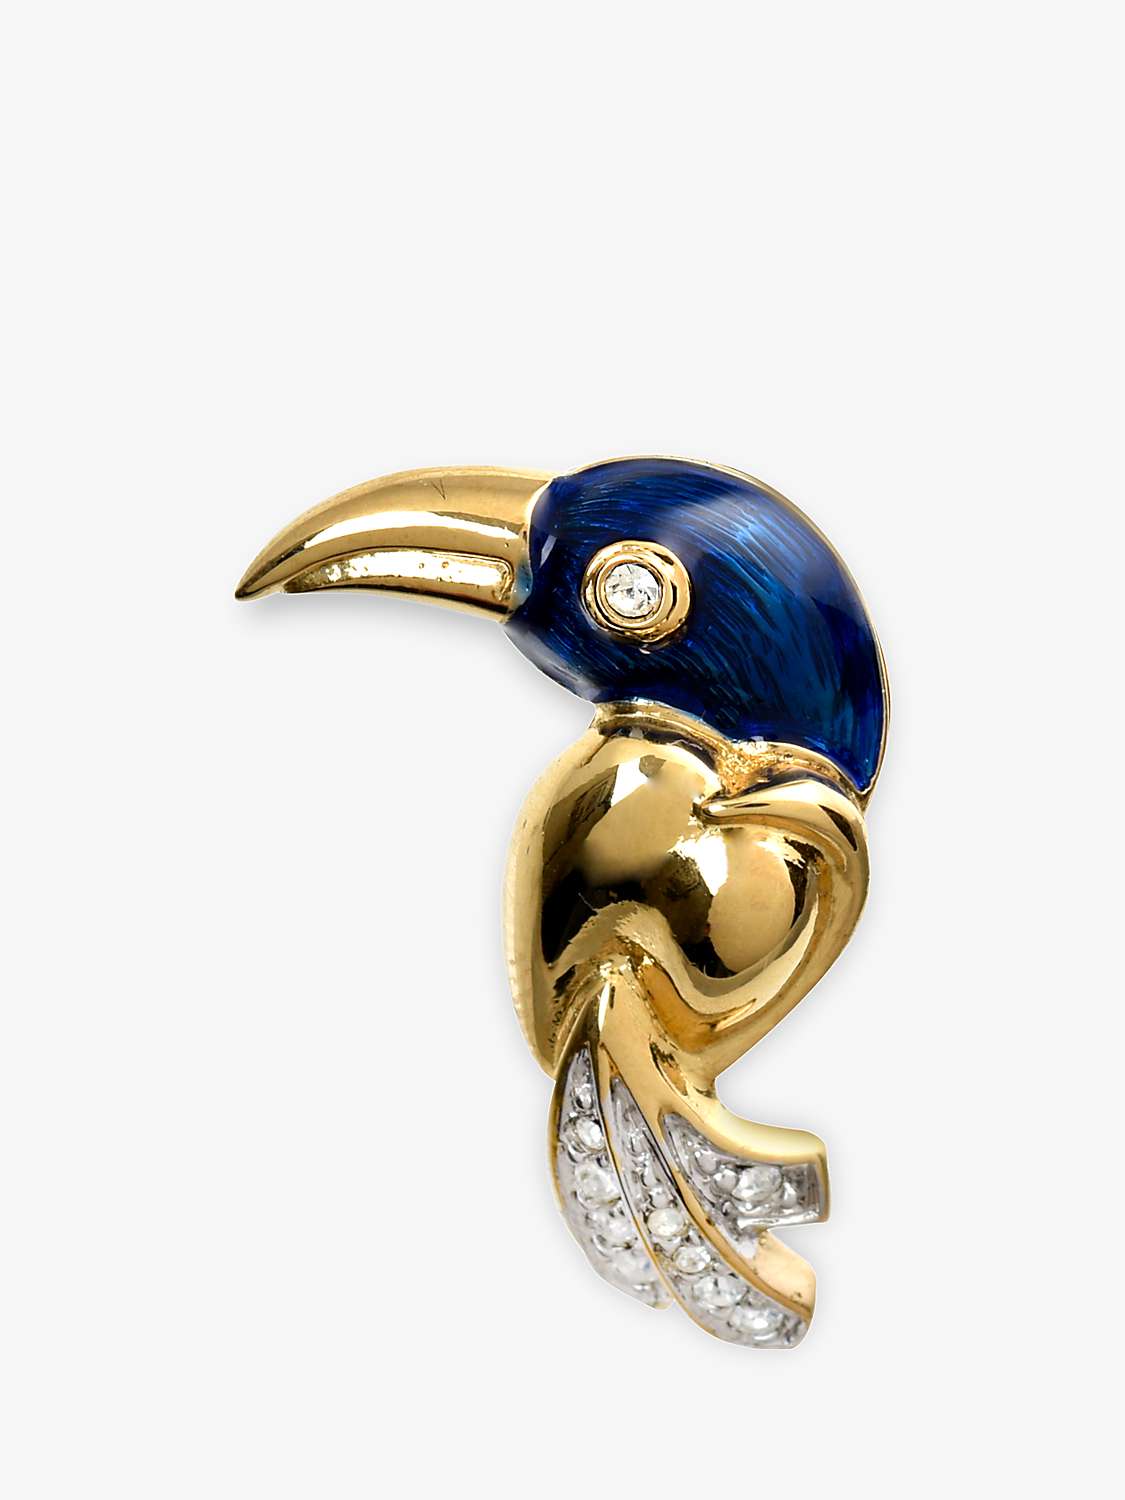 Buy Eclectica Vintage Cabouchon 22ct Gold Plated Swarovski Crystal Toucan Brooch, Dated Circa 1980's, Blue/Multi Online at johnlewis.com